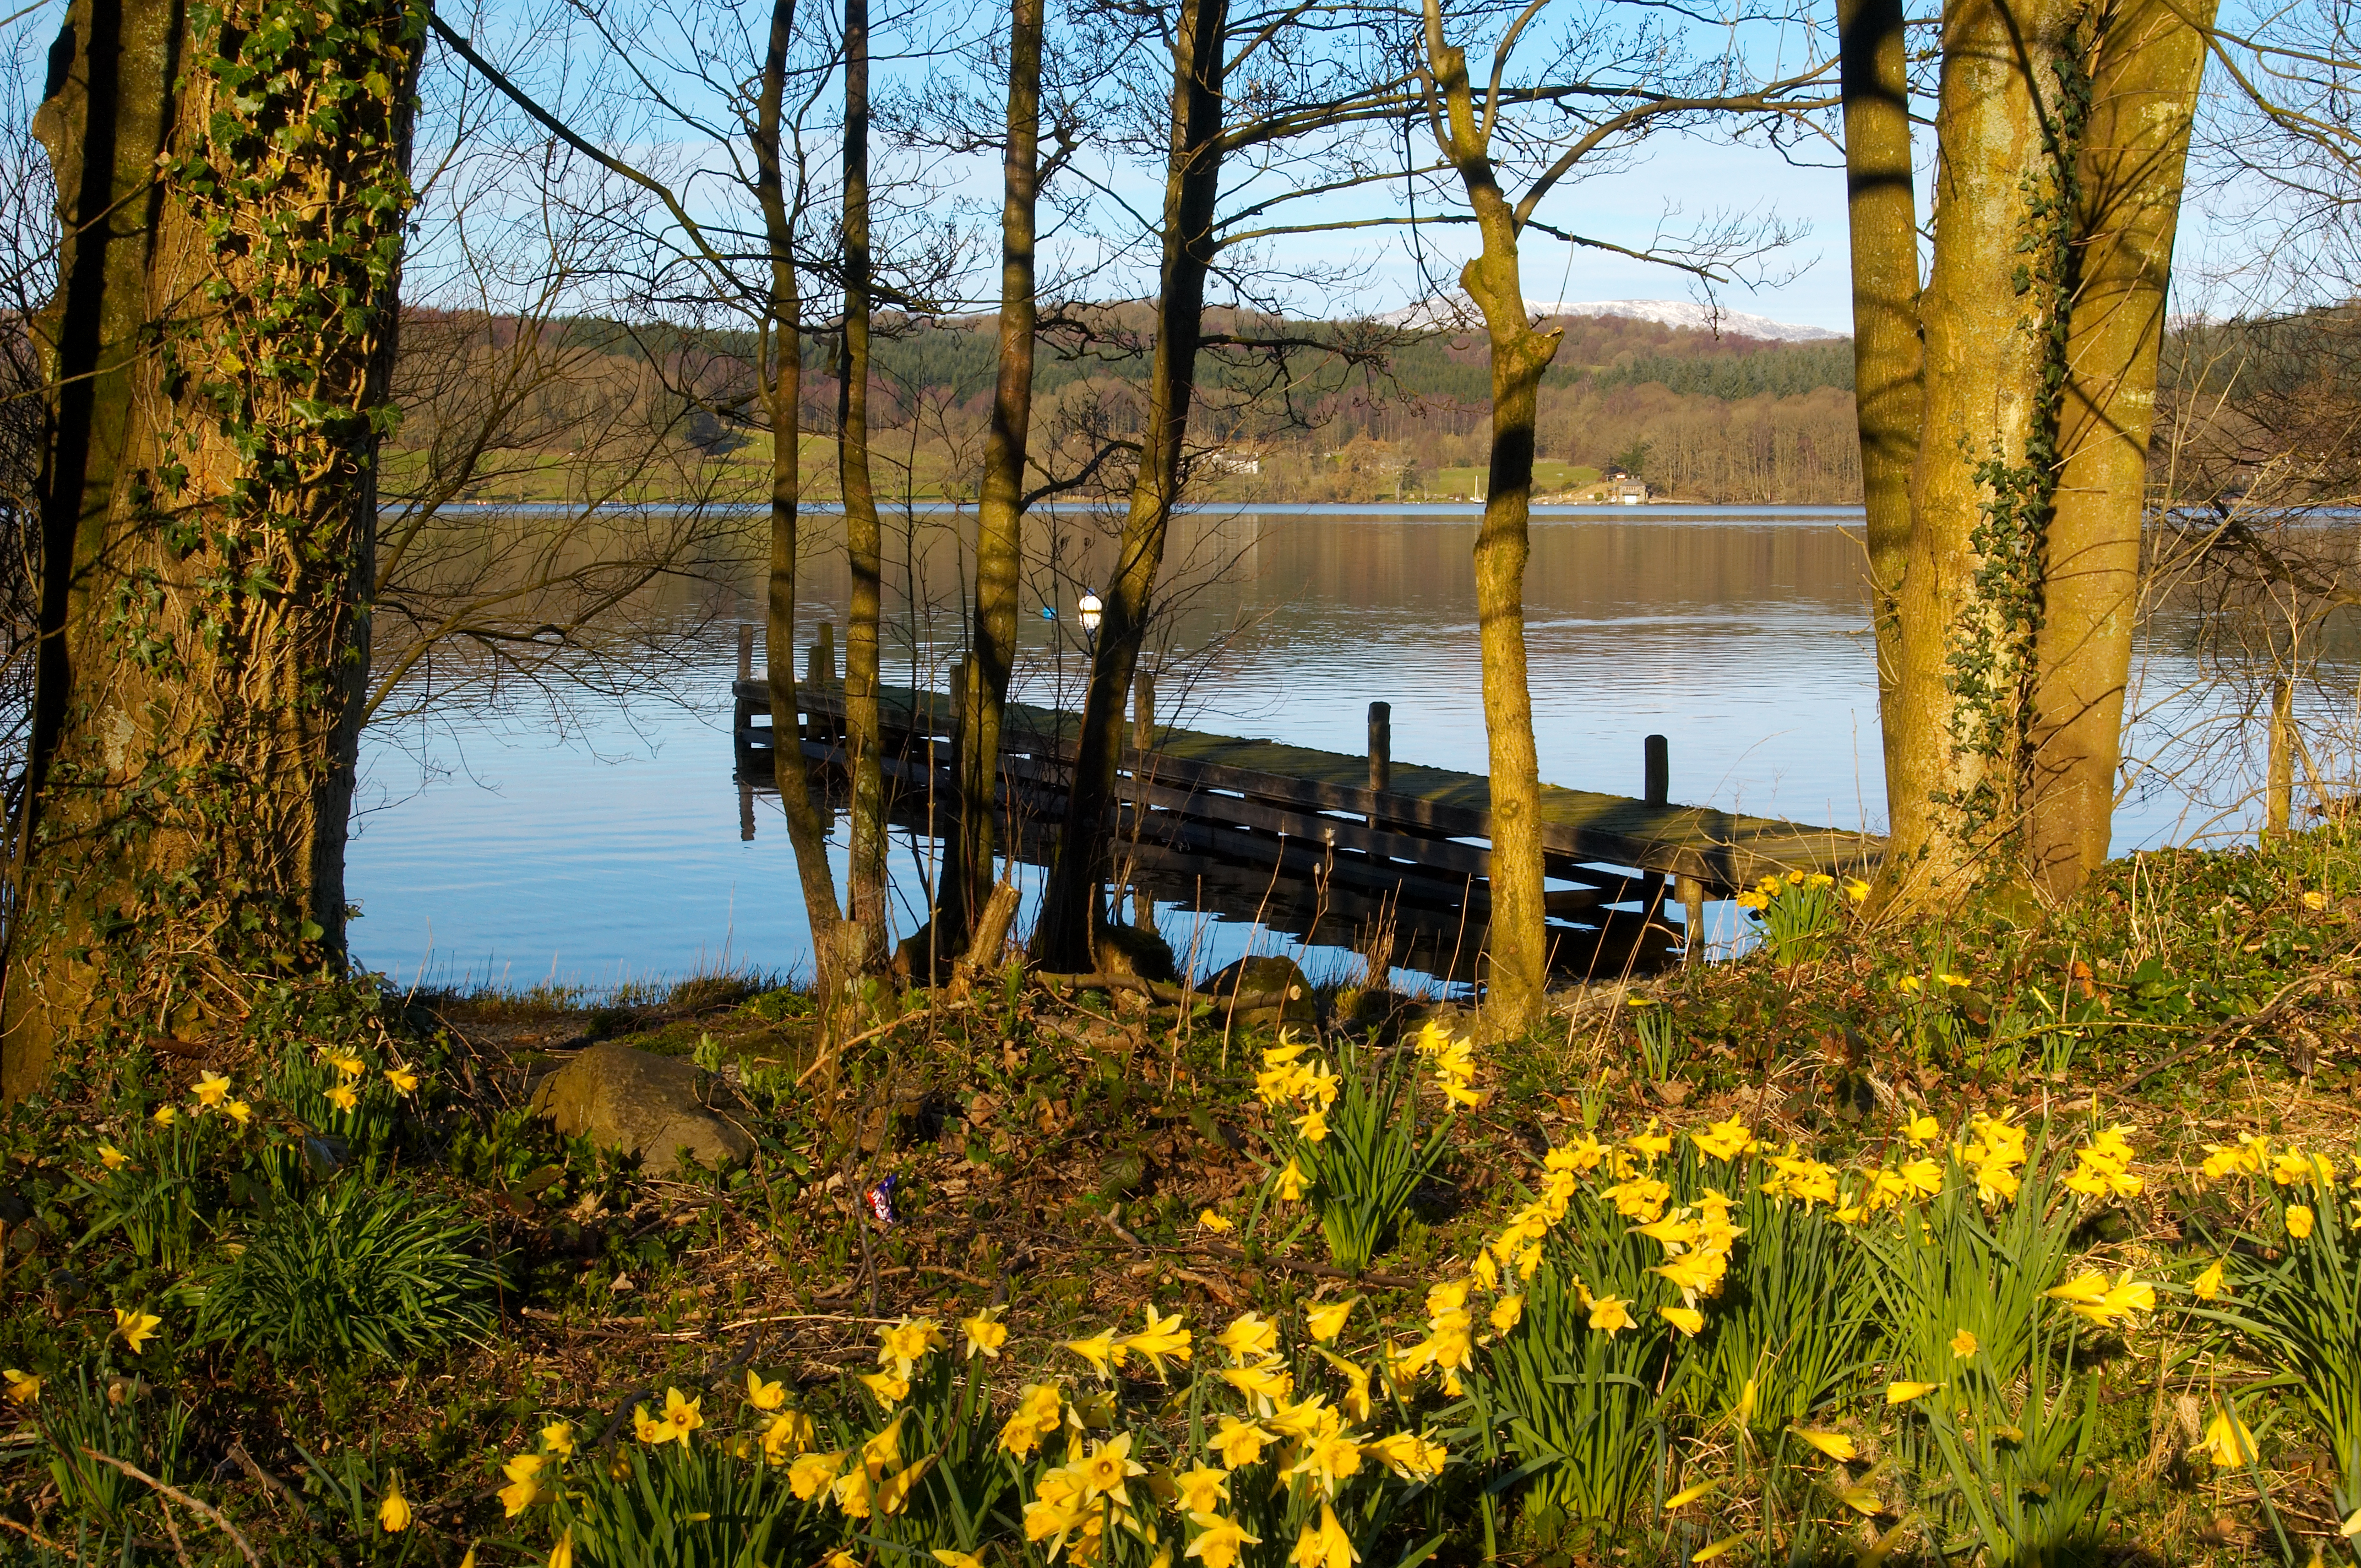 Escape to beautiful scenery and tranquil waters this Easter time. This is a photo of Lake Windermere in Springtime. The Lake is just 5-7 minutes' walk from our door.